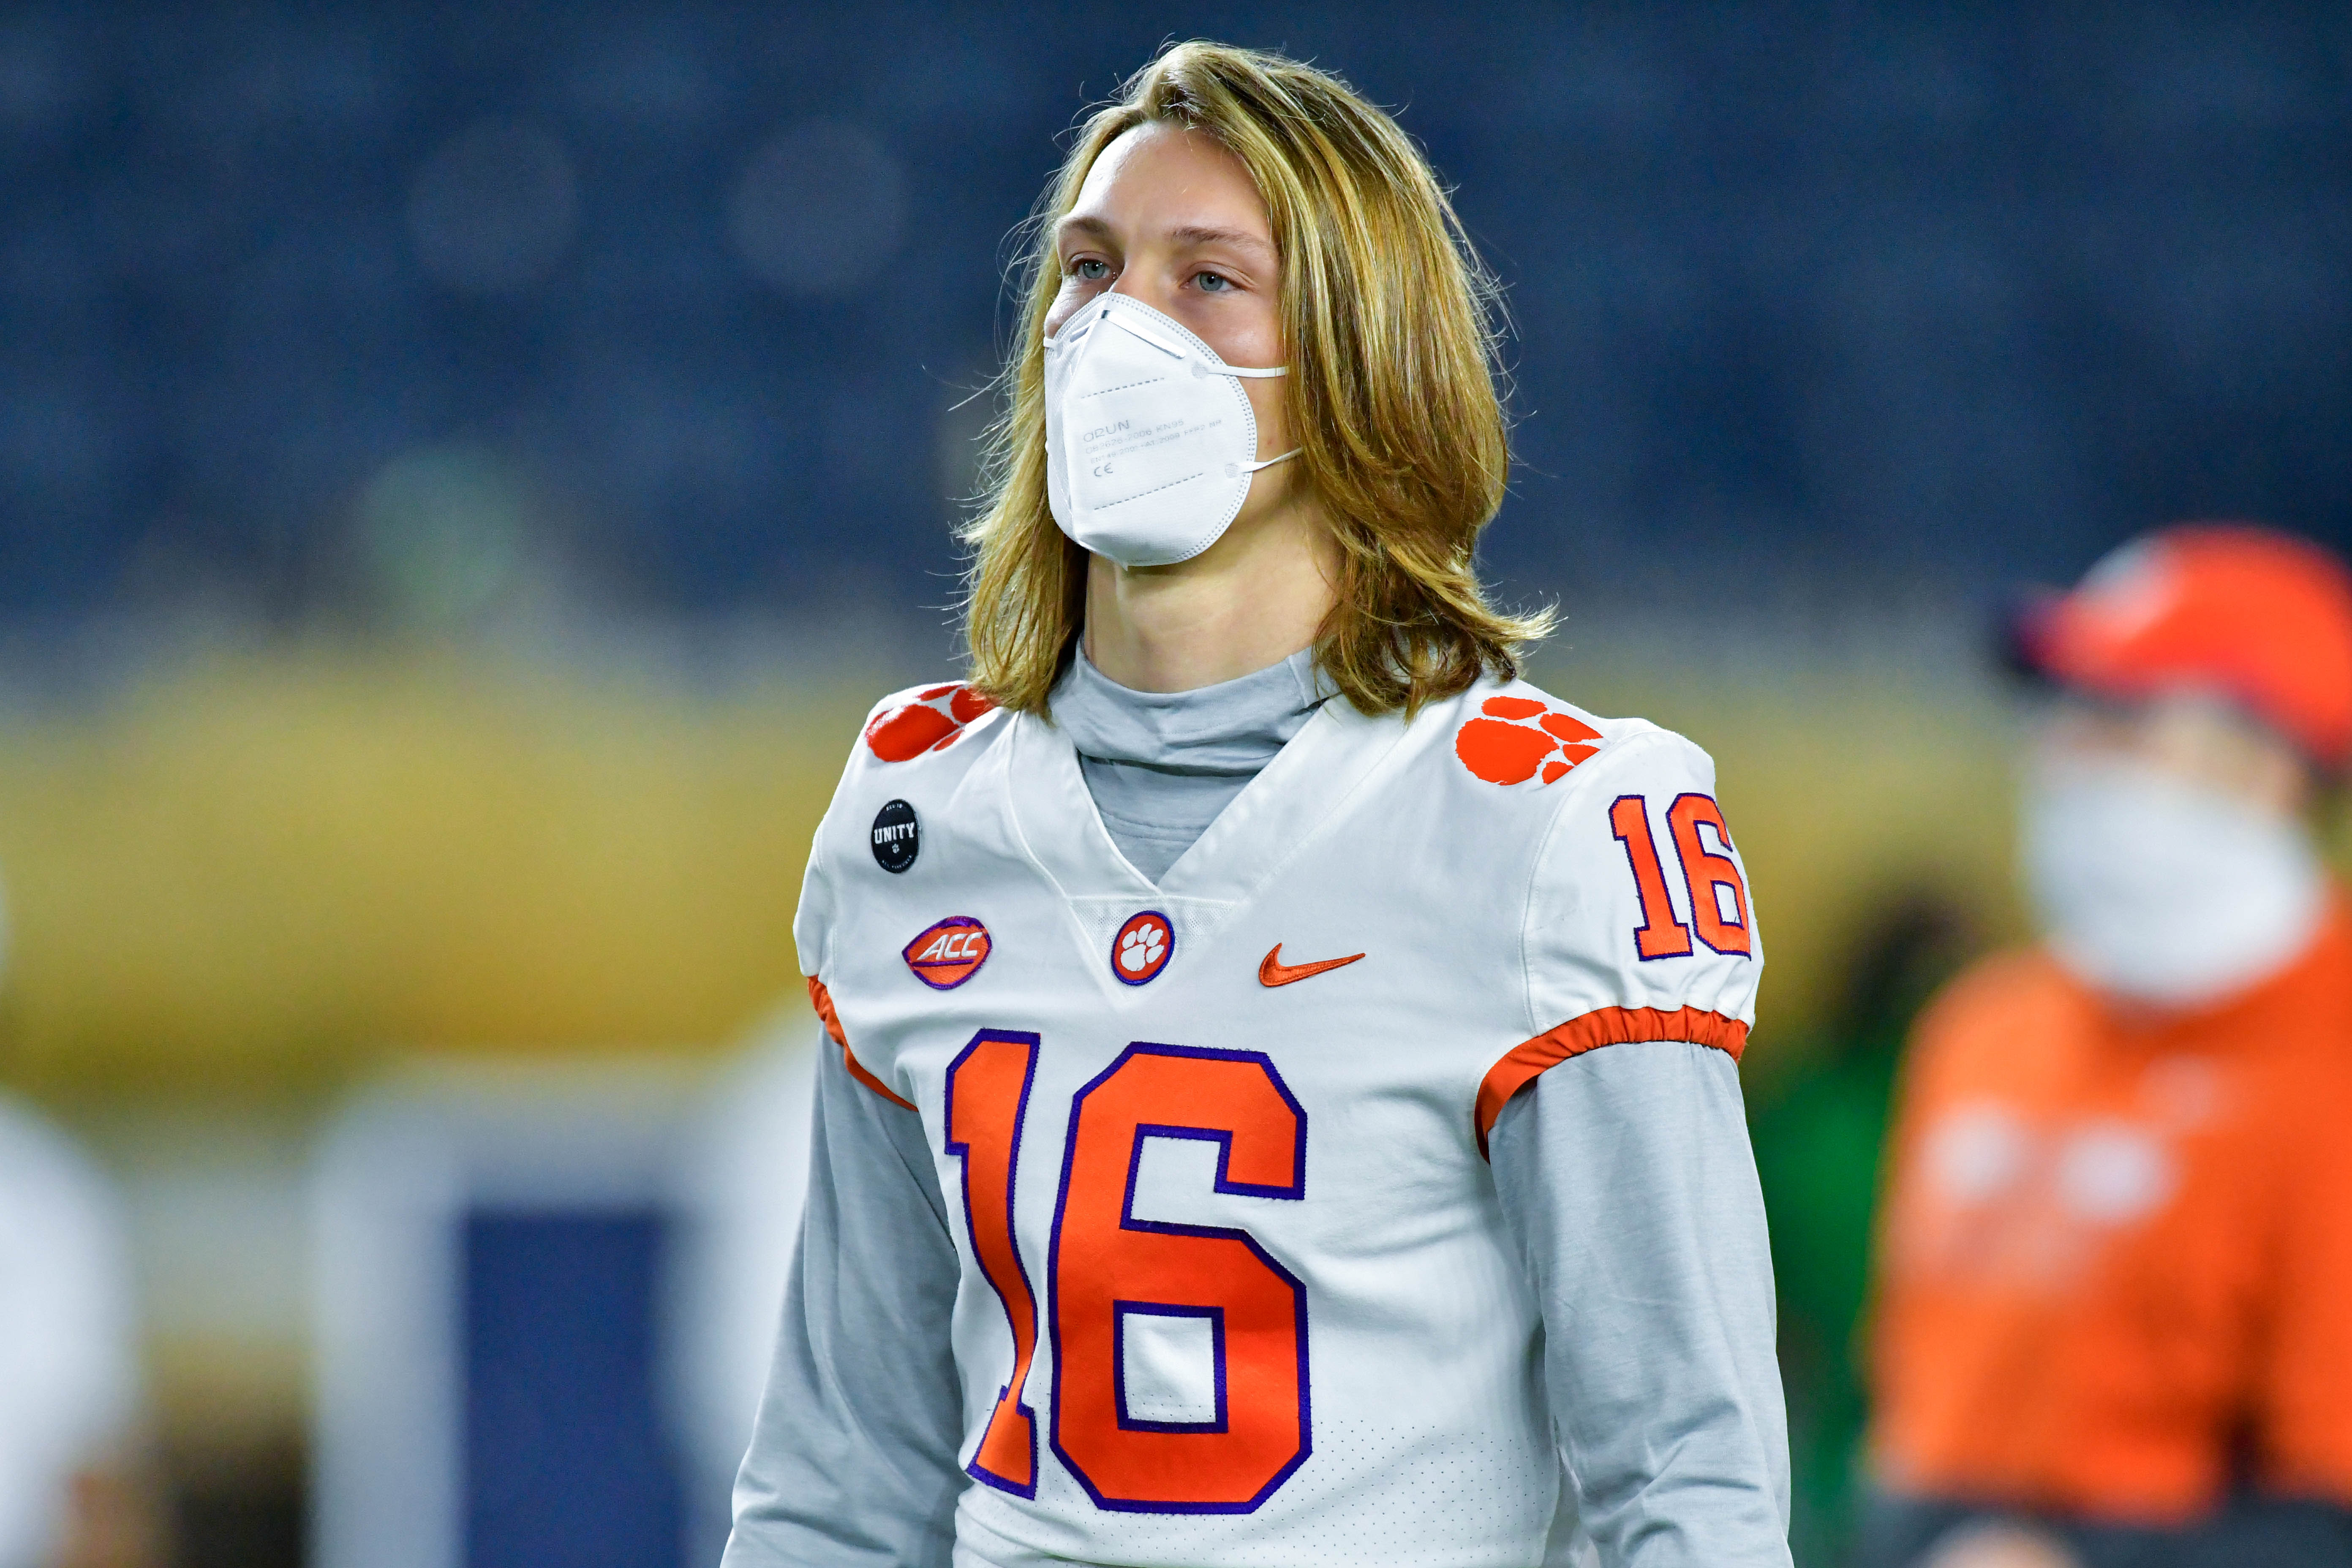 Quarterback Trevor Lawrence of the Clemson Tigers watches warmups